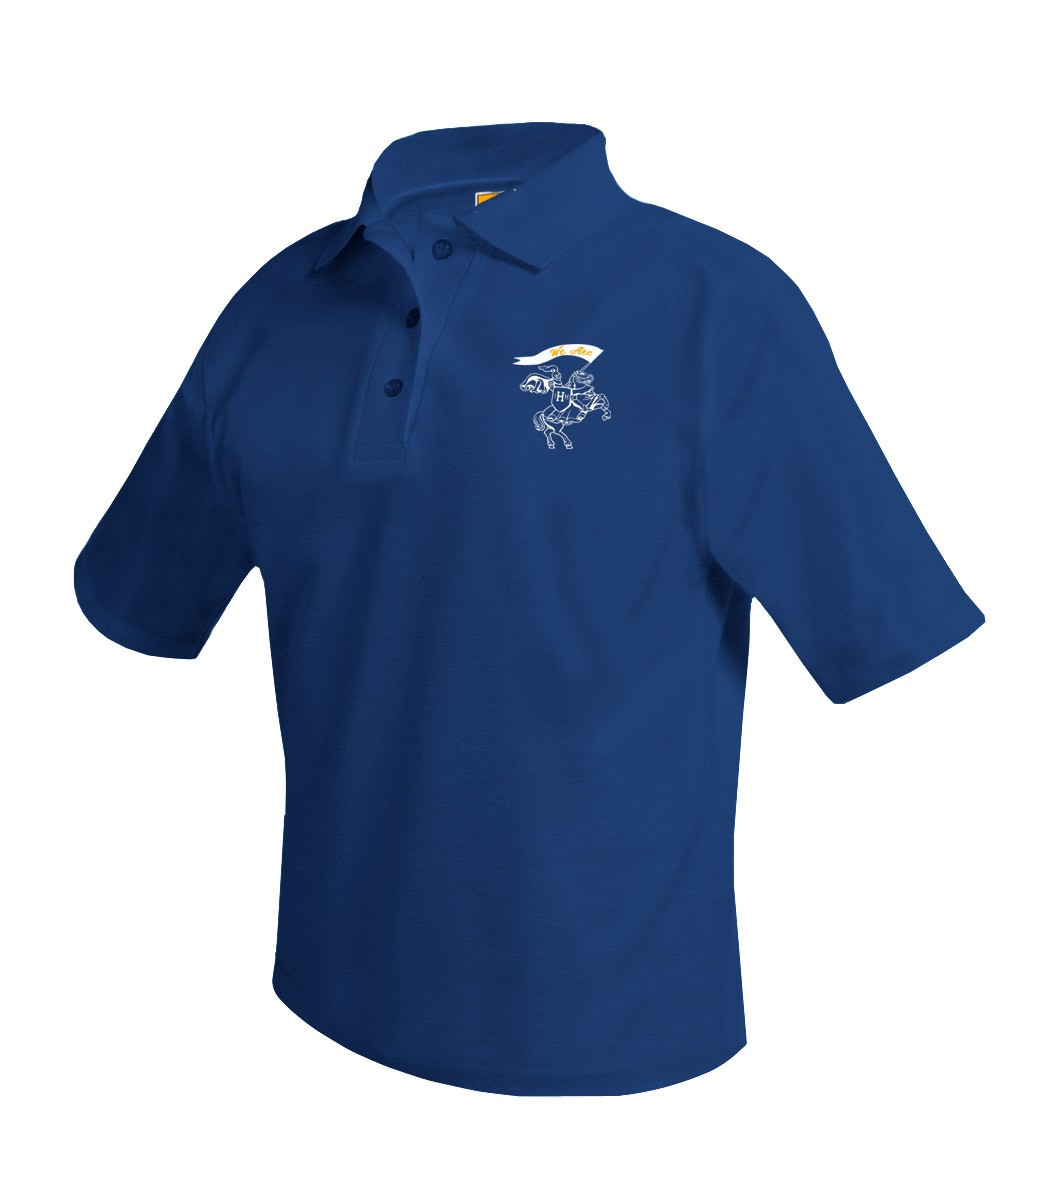 IHM Spirit Navy S/S Polo w/ White Knight Logo - Please Allow 2-3 Weeks for Delivery